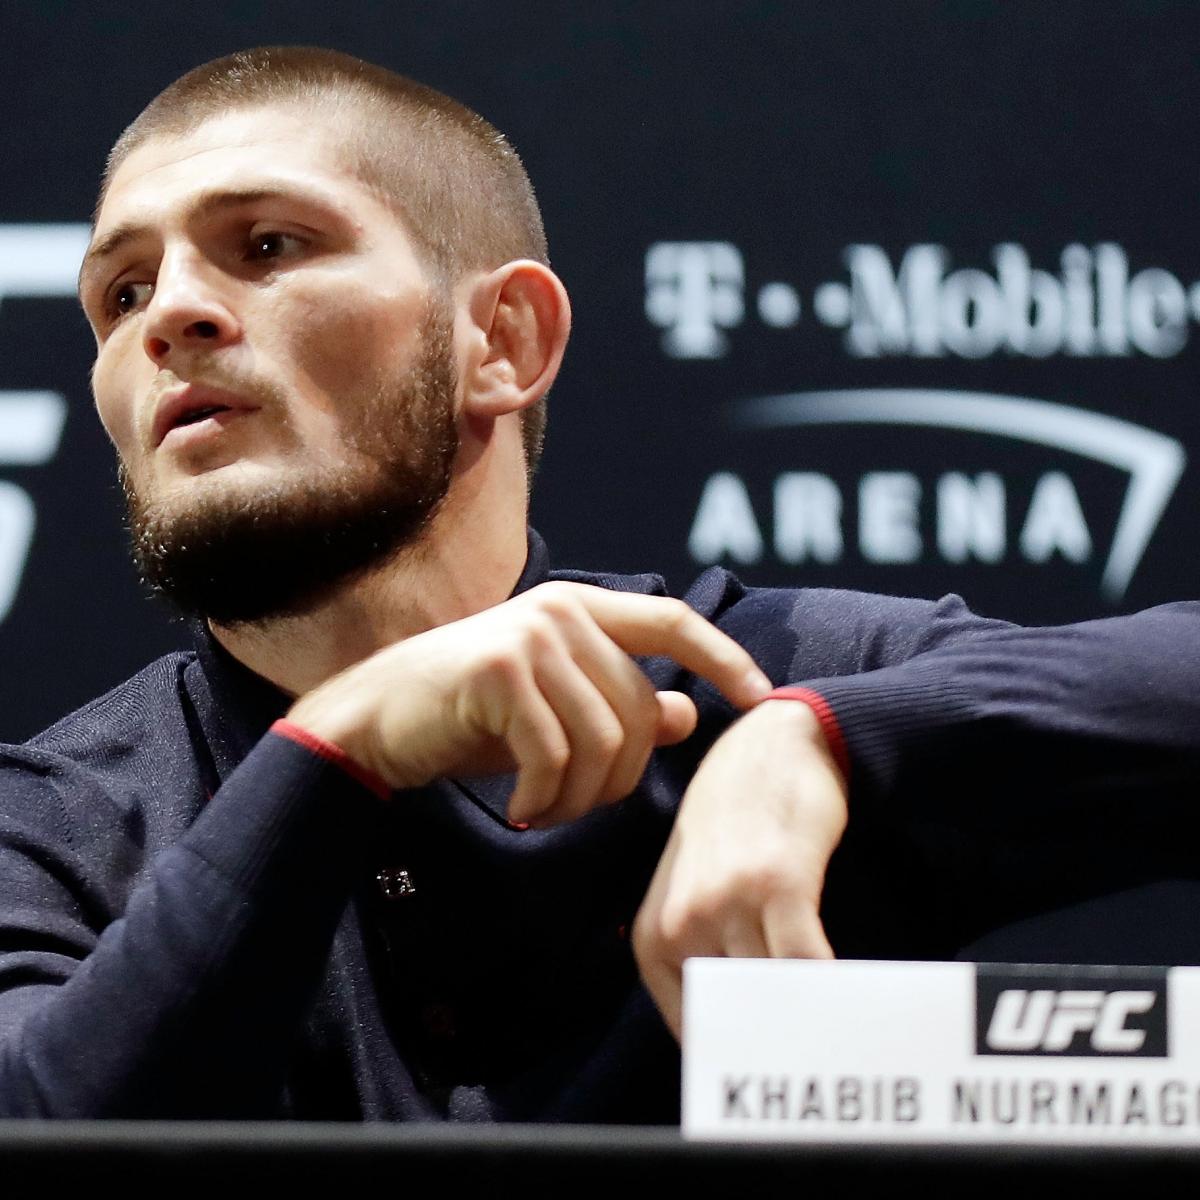 Khabib/McGregor Betting Props: UFC 229 Odds Cover All Aspects of Marquee Bout ...